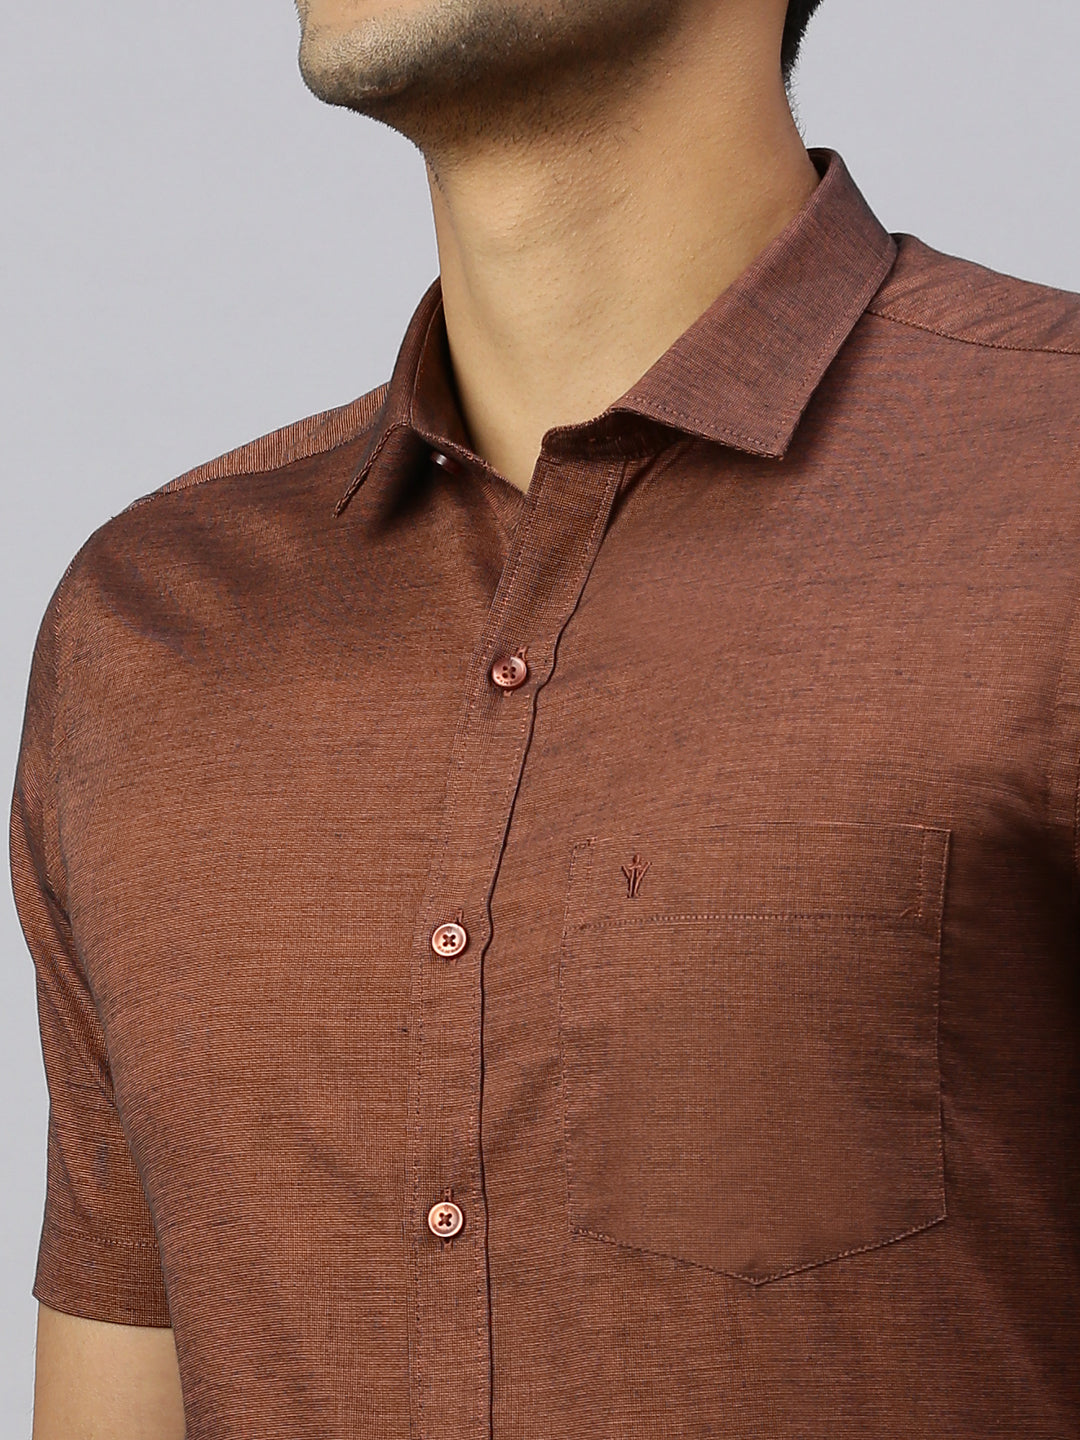 Mens Half Sleeve Smart Fit Louts Brown Classic Shirt